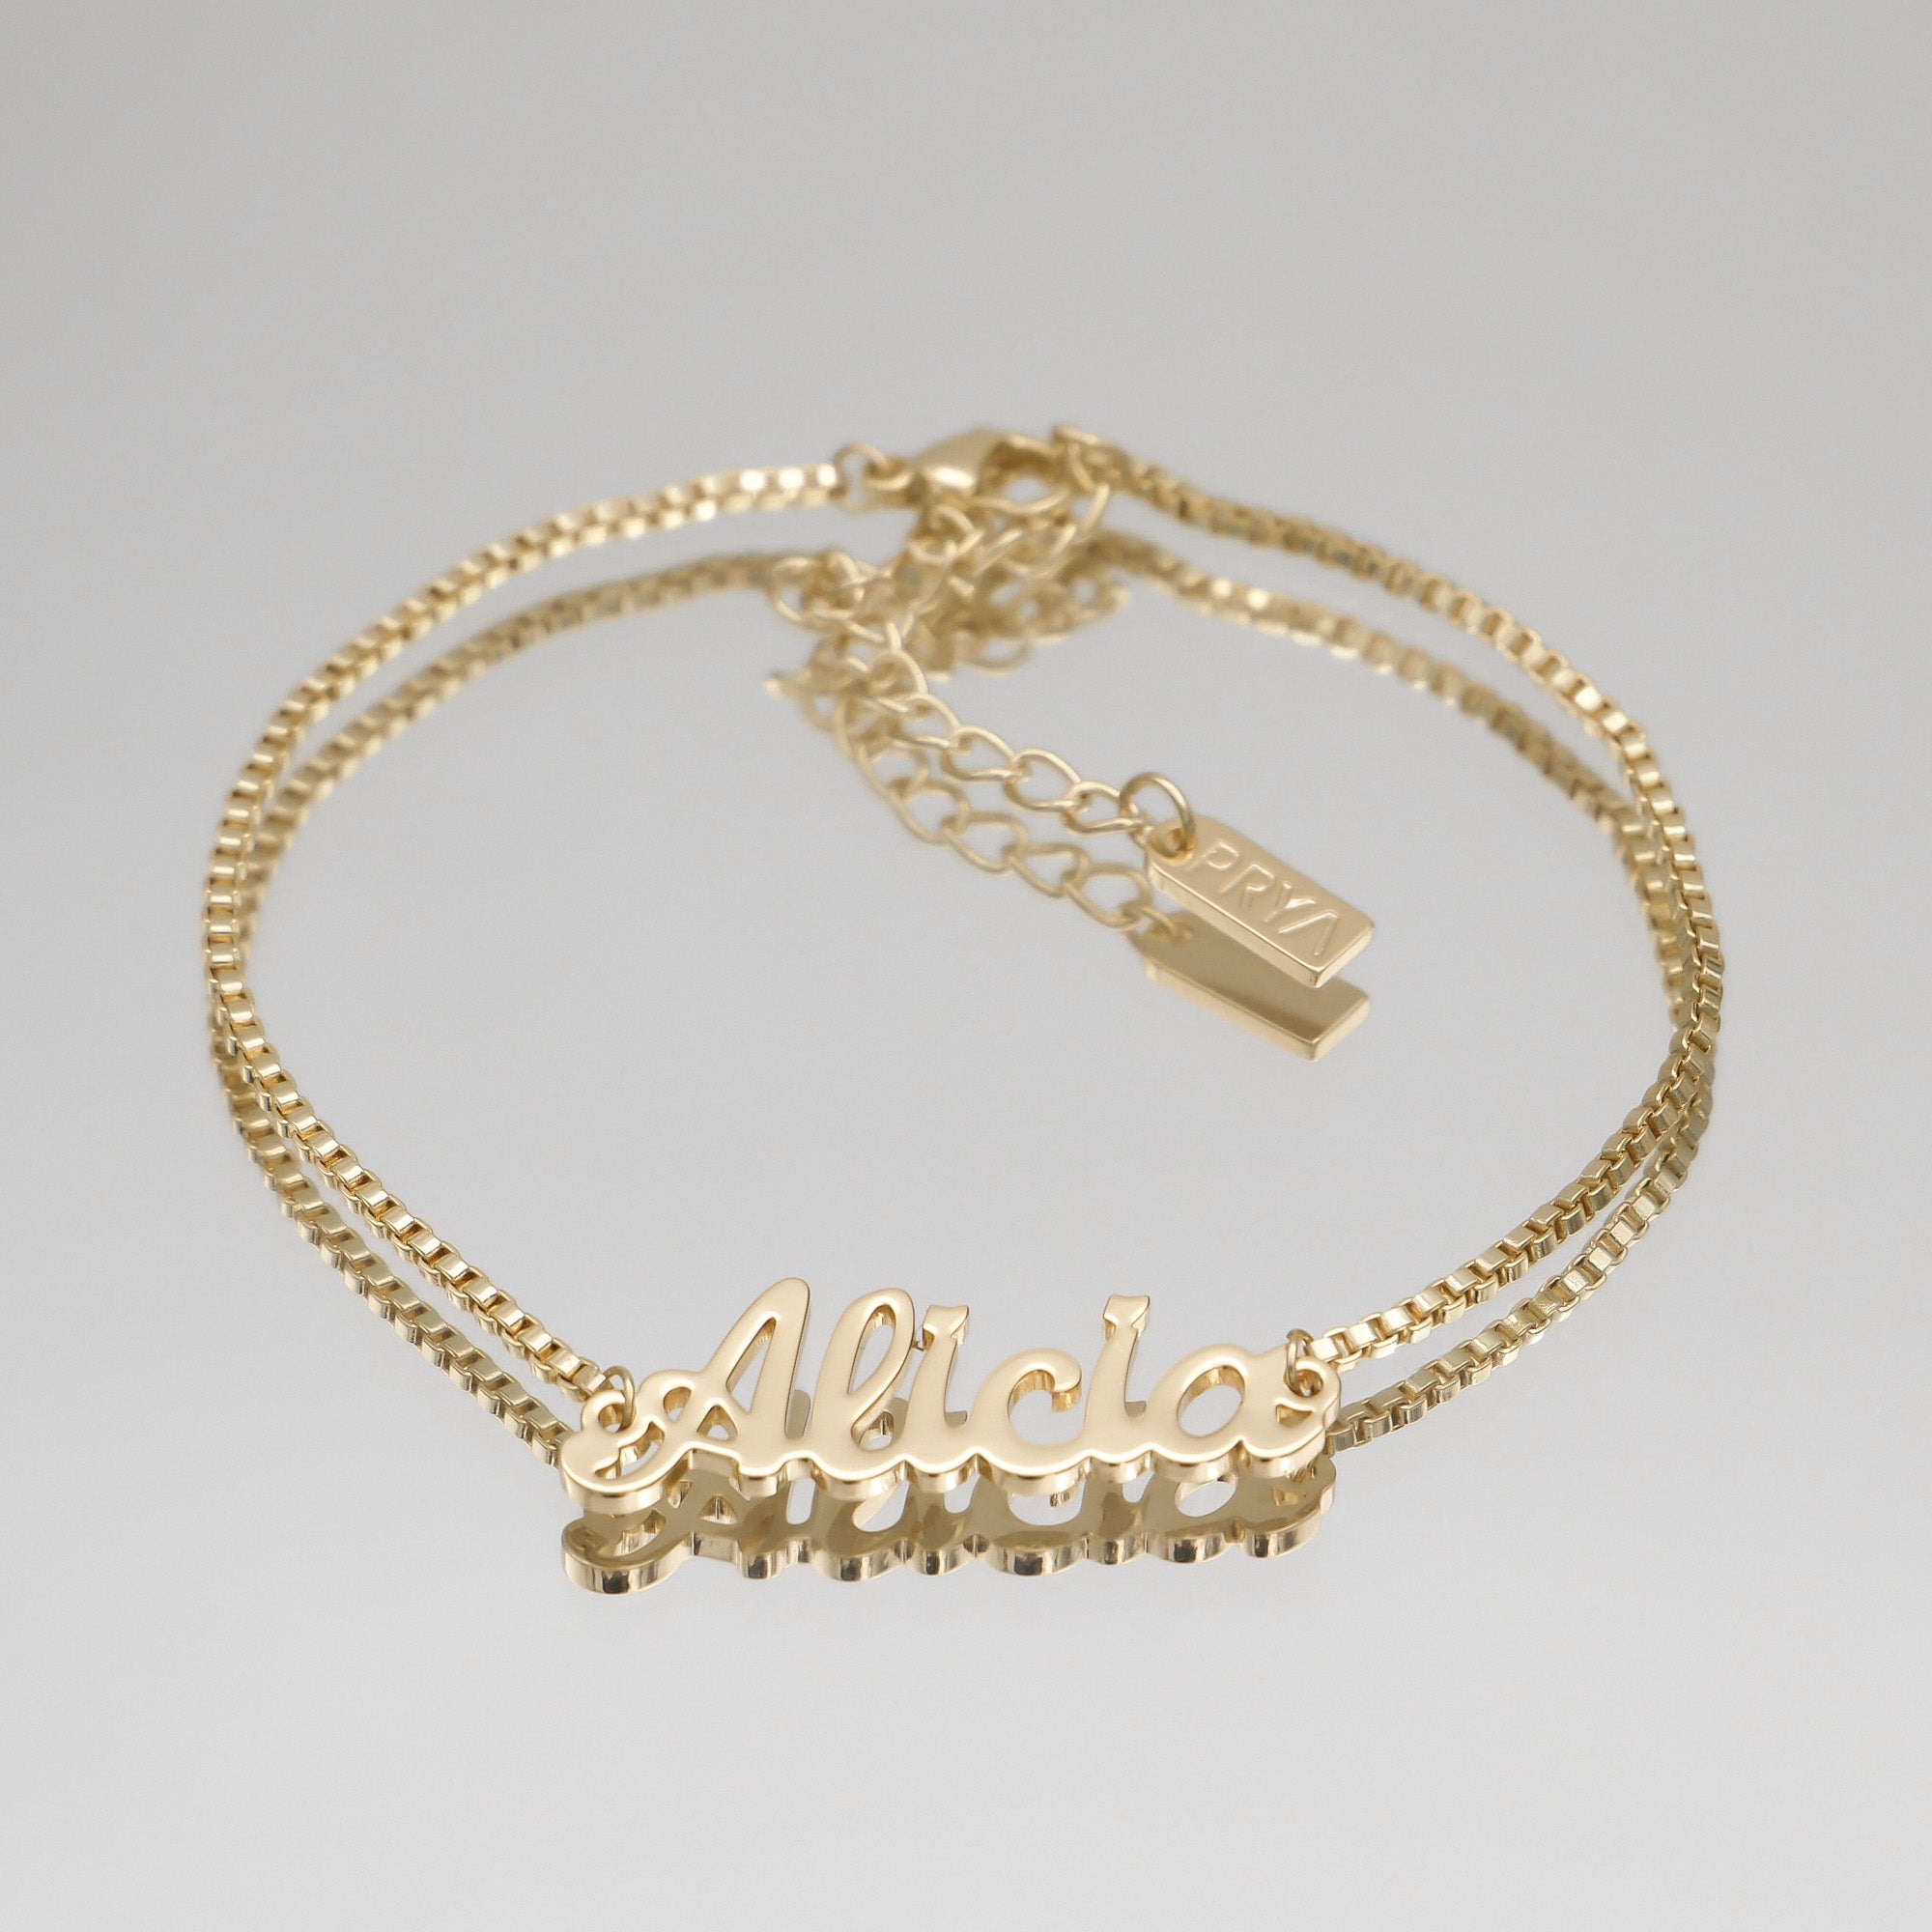 Gold Miami customised name anklet with box chain